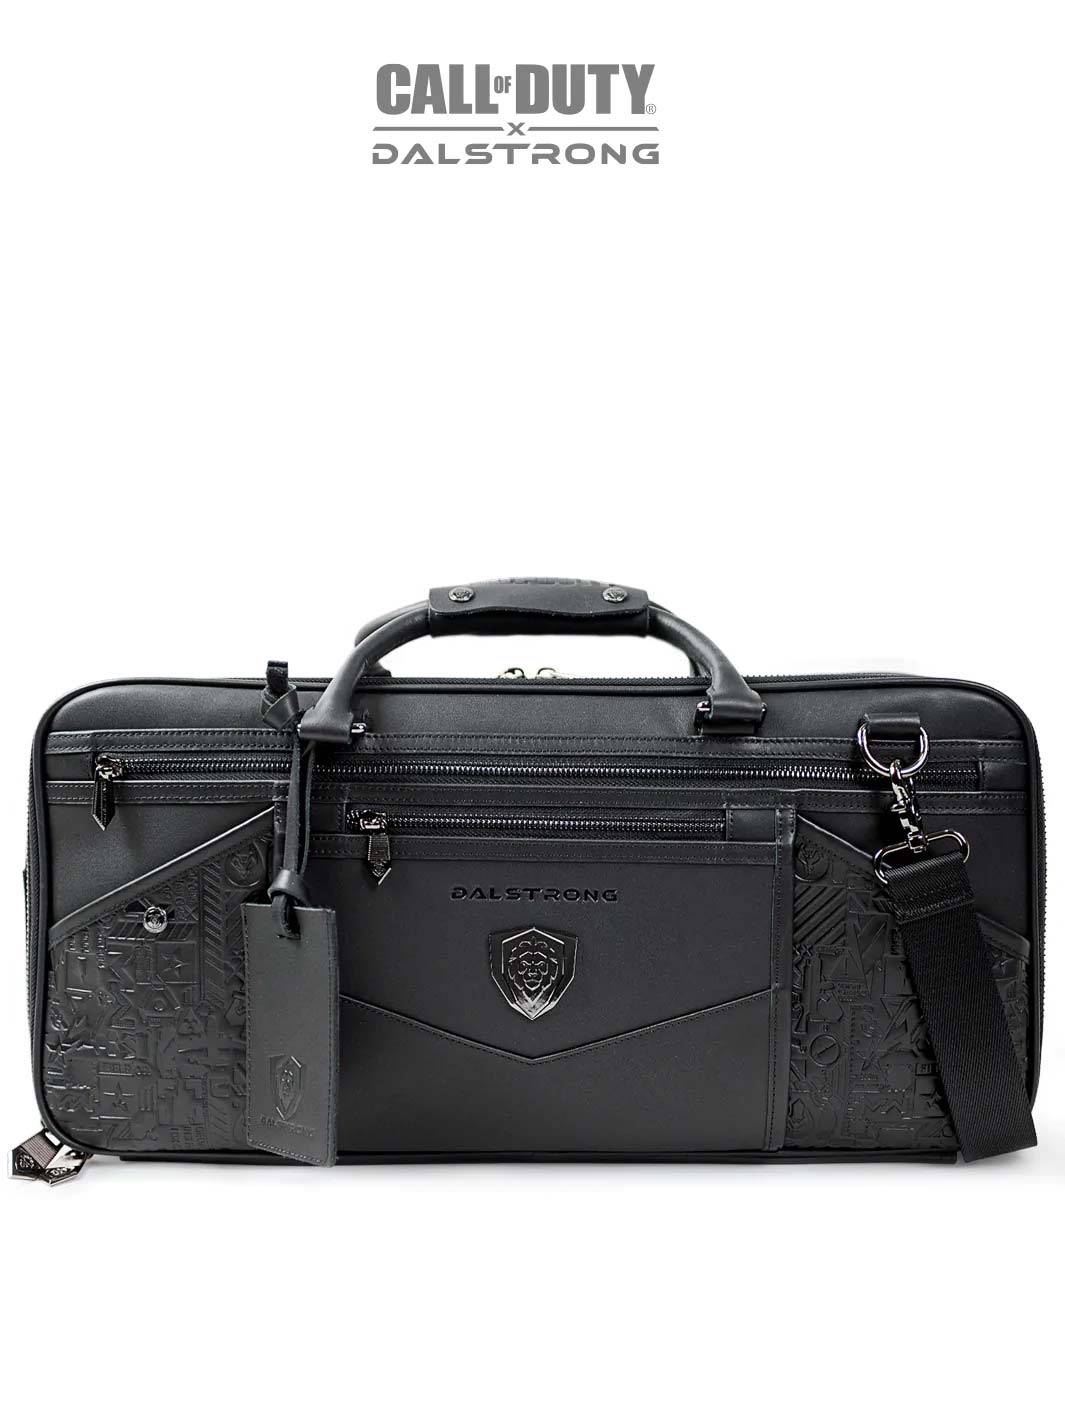 Dalstrong call of duty exclusive collector and limited edition black genuine leather knife bag.